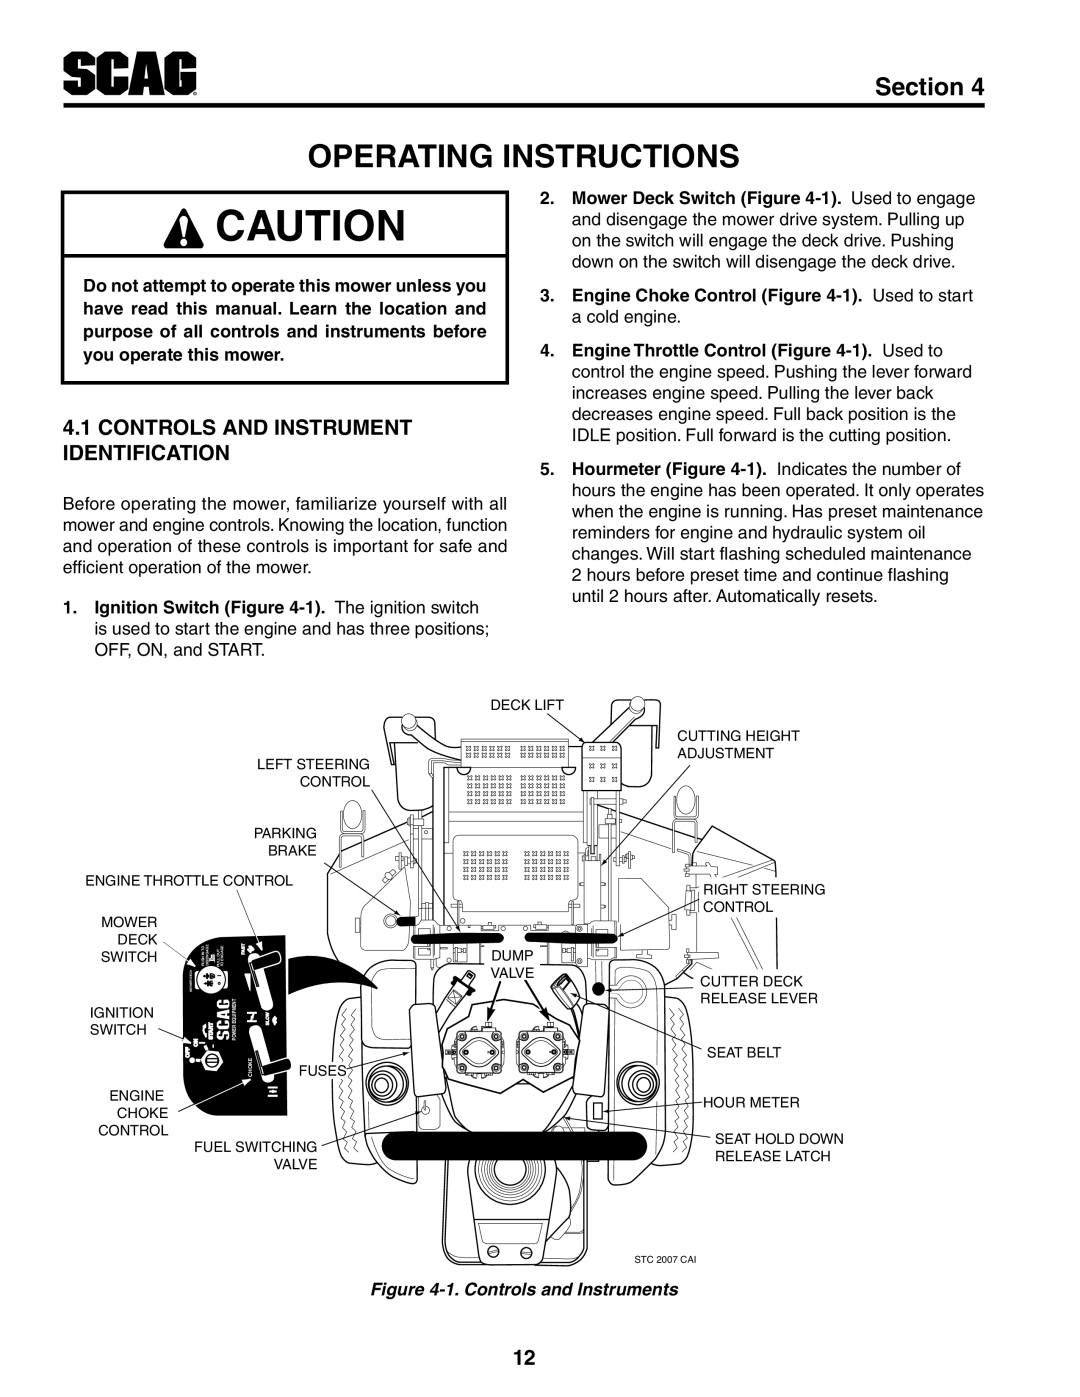 Scag Power Equipment STWC61V-26KA-LC, STWC52V-25KA Operating Instructions, Section, Controls And Instrument Identification 